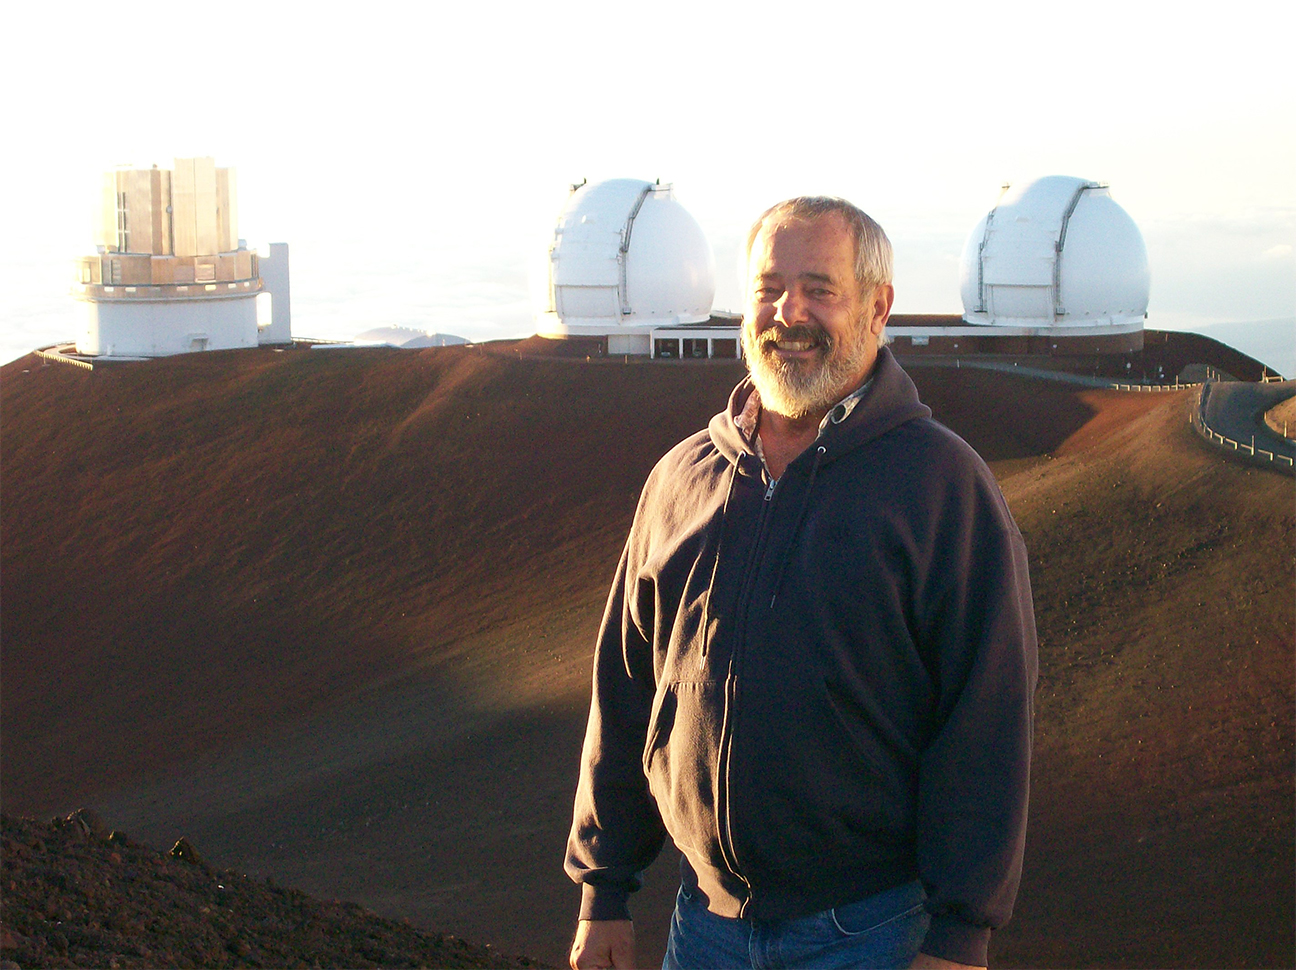 image of researcher in front of large telescope facilities